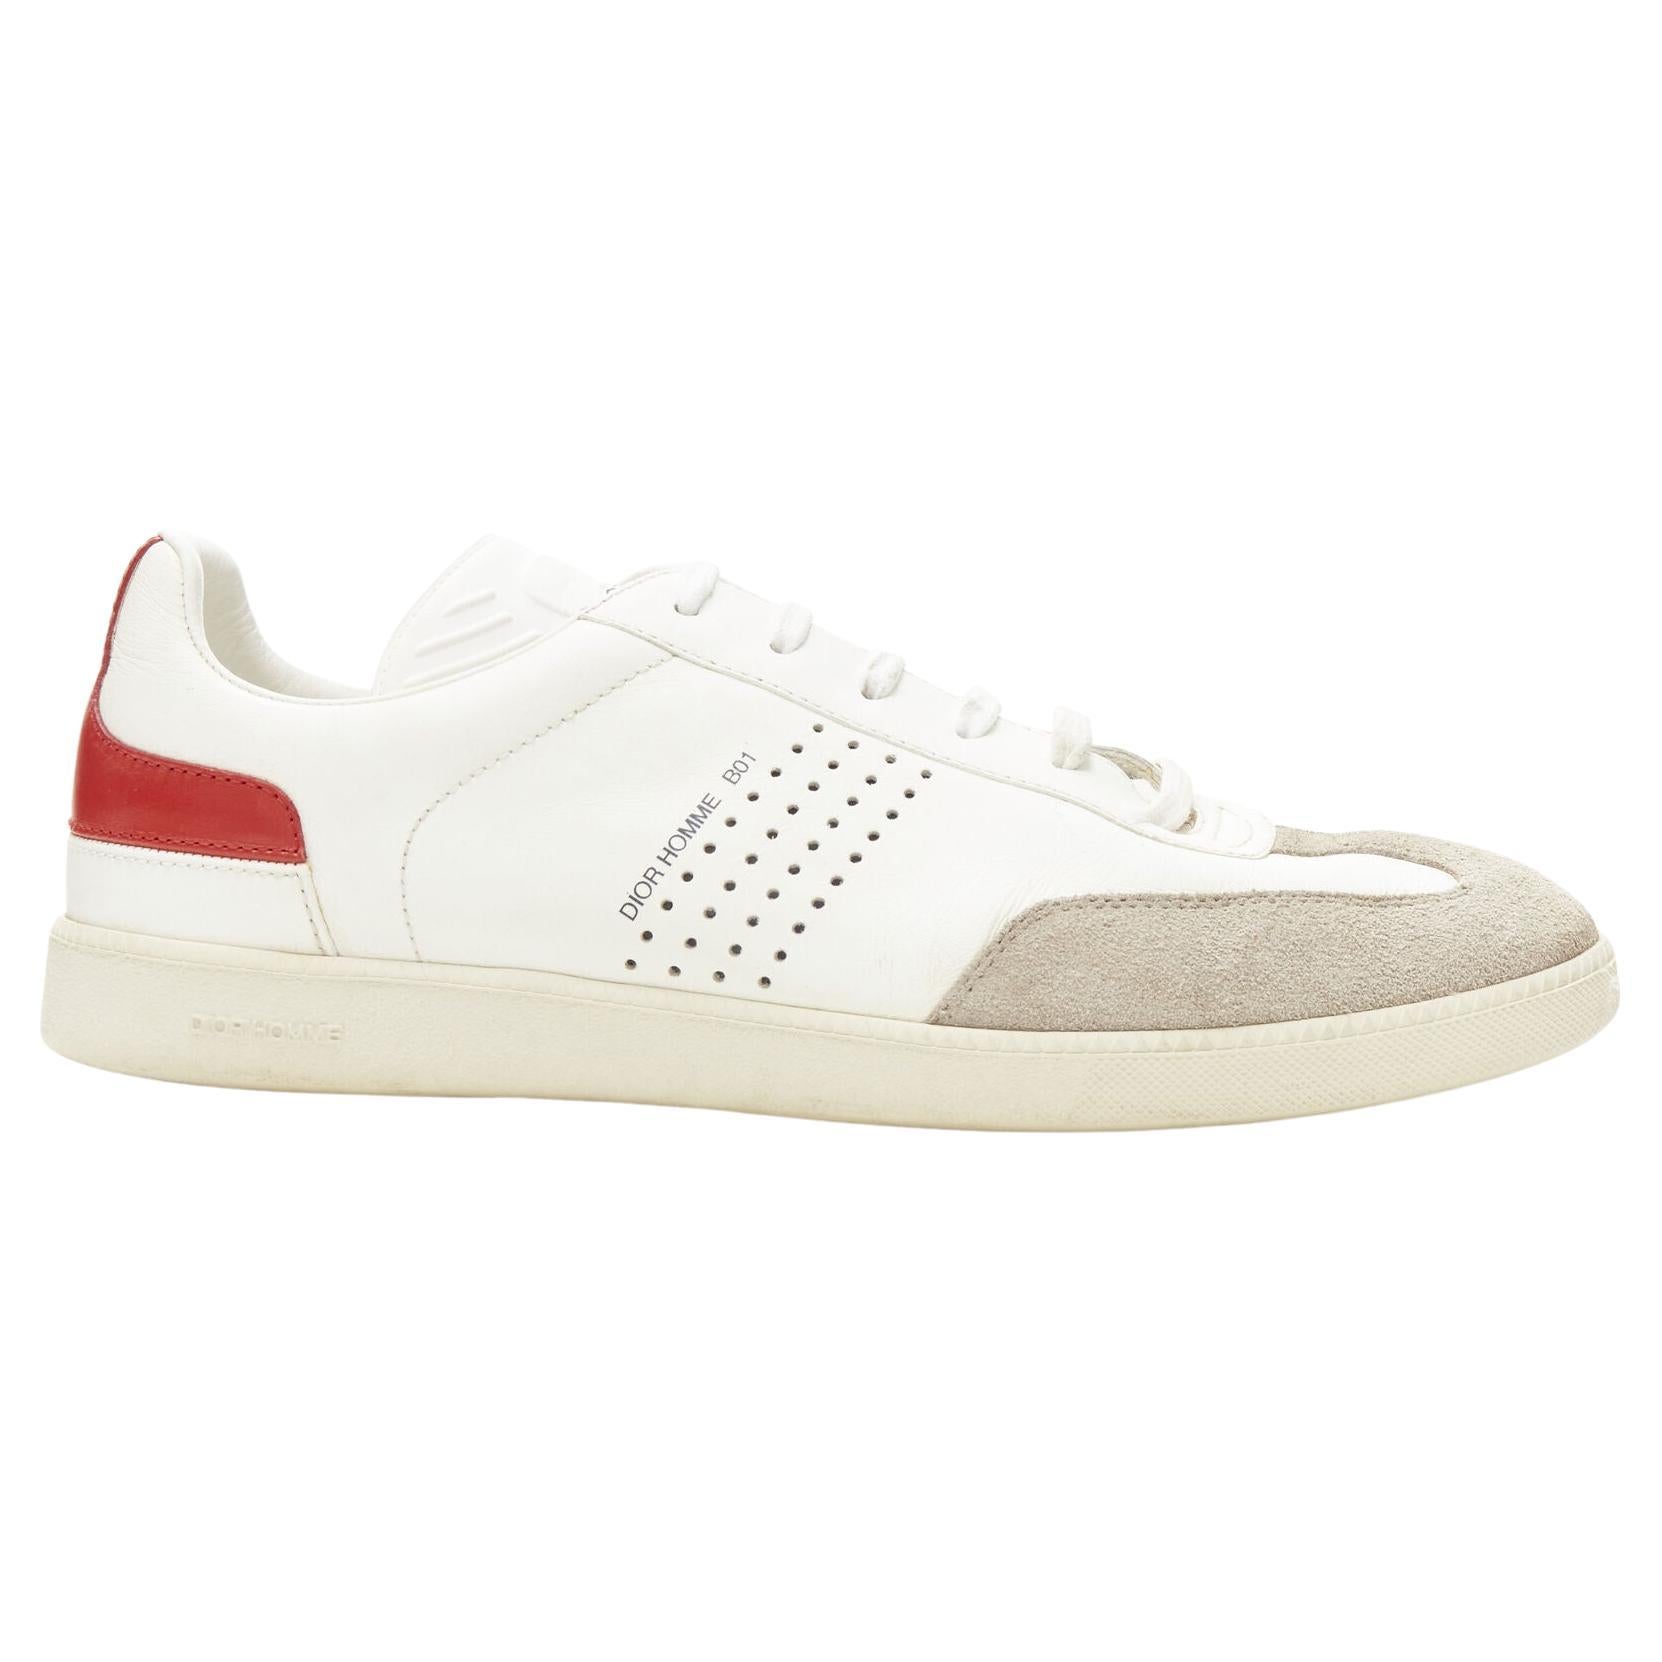 DIOR HOMME B01 white red Bee laether suede trim  trainer sneaker EU38 For Sale